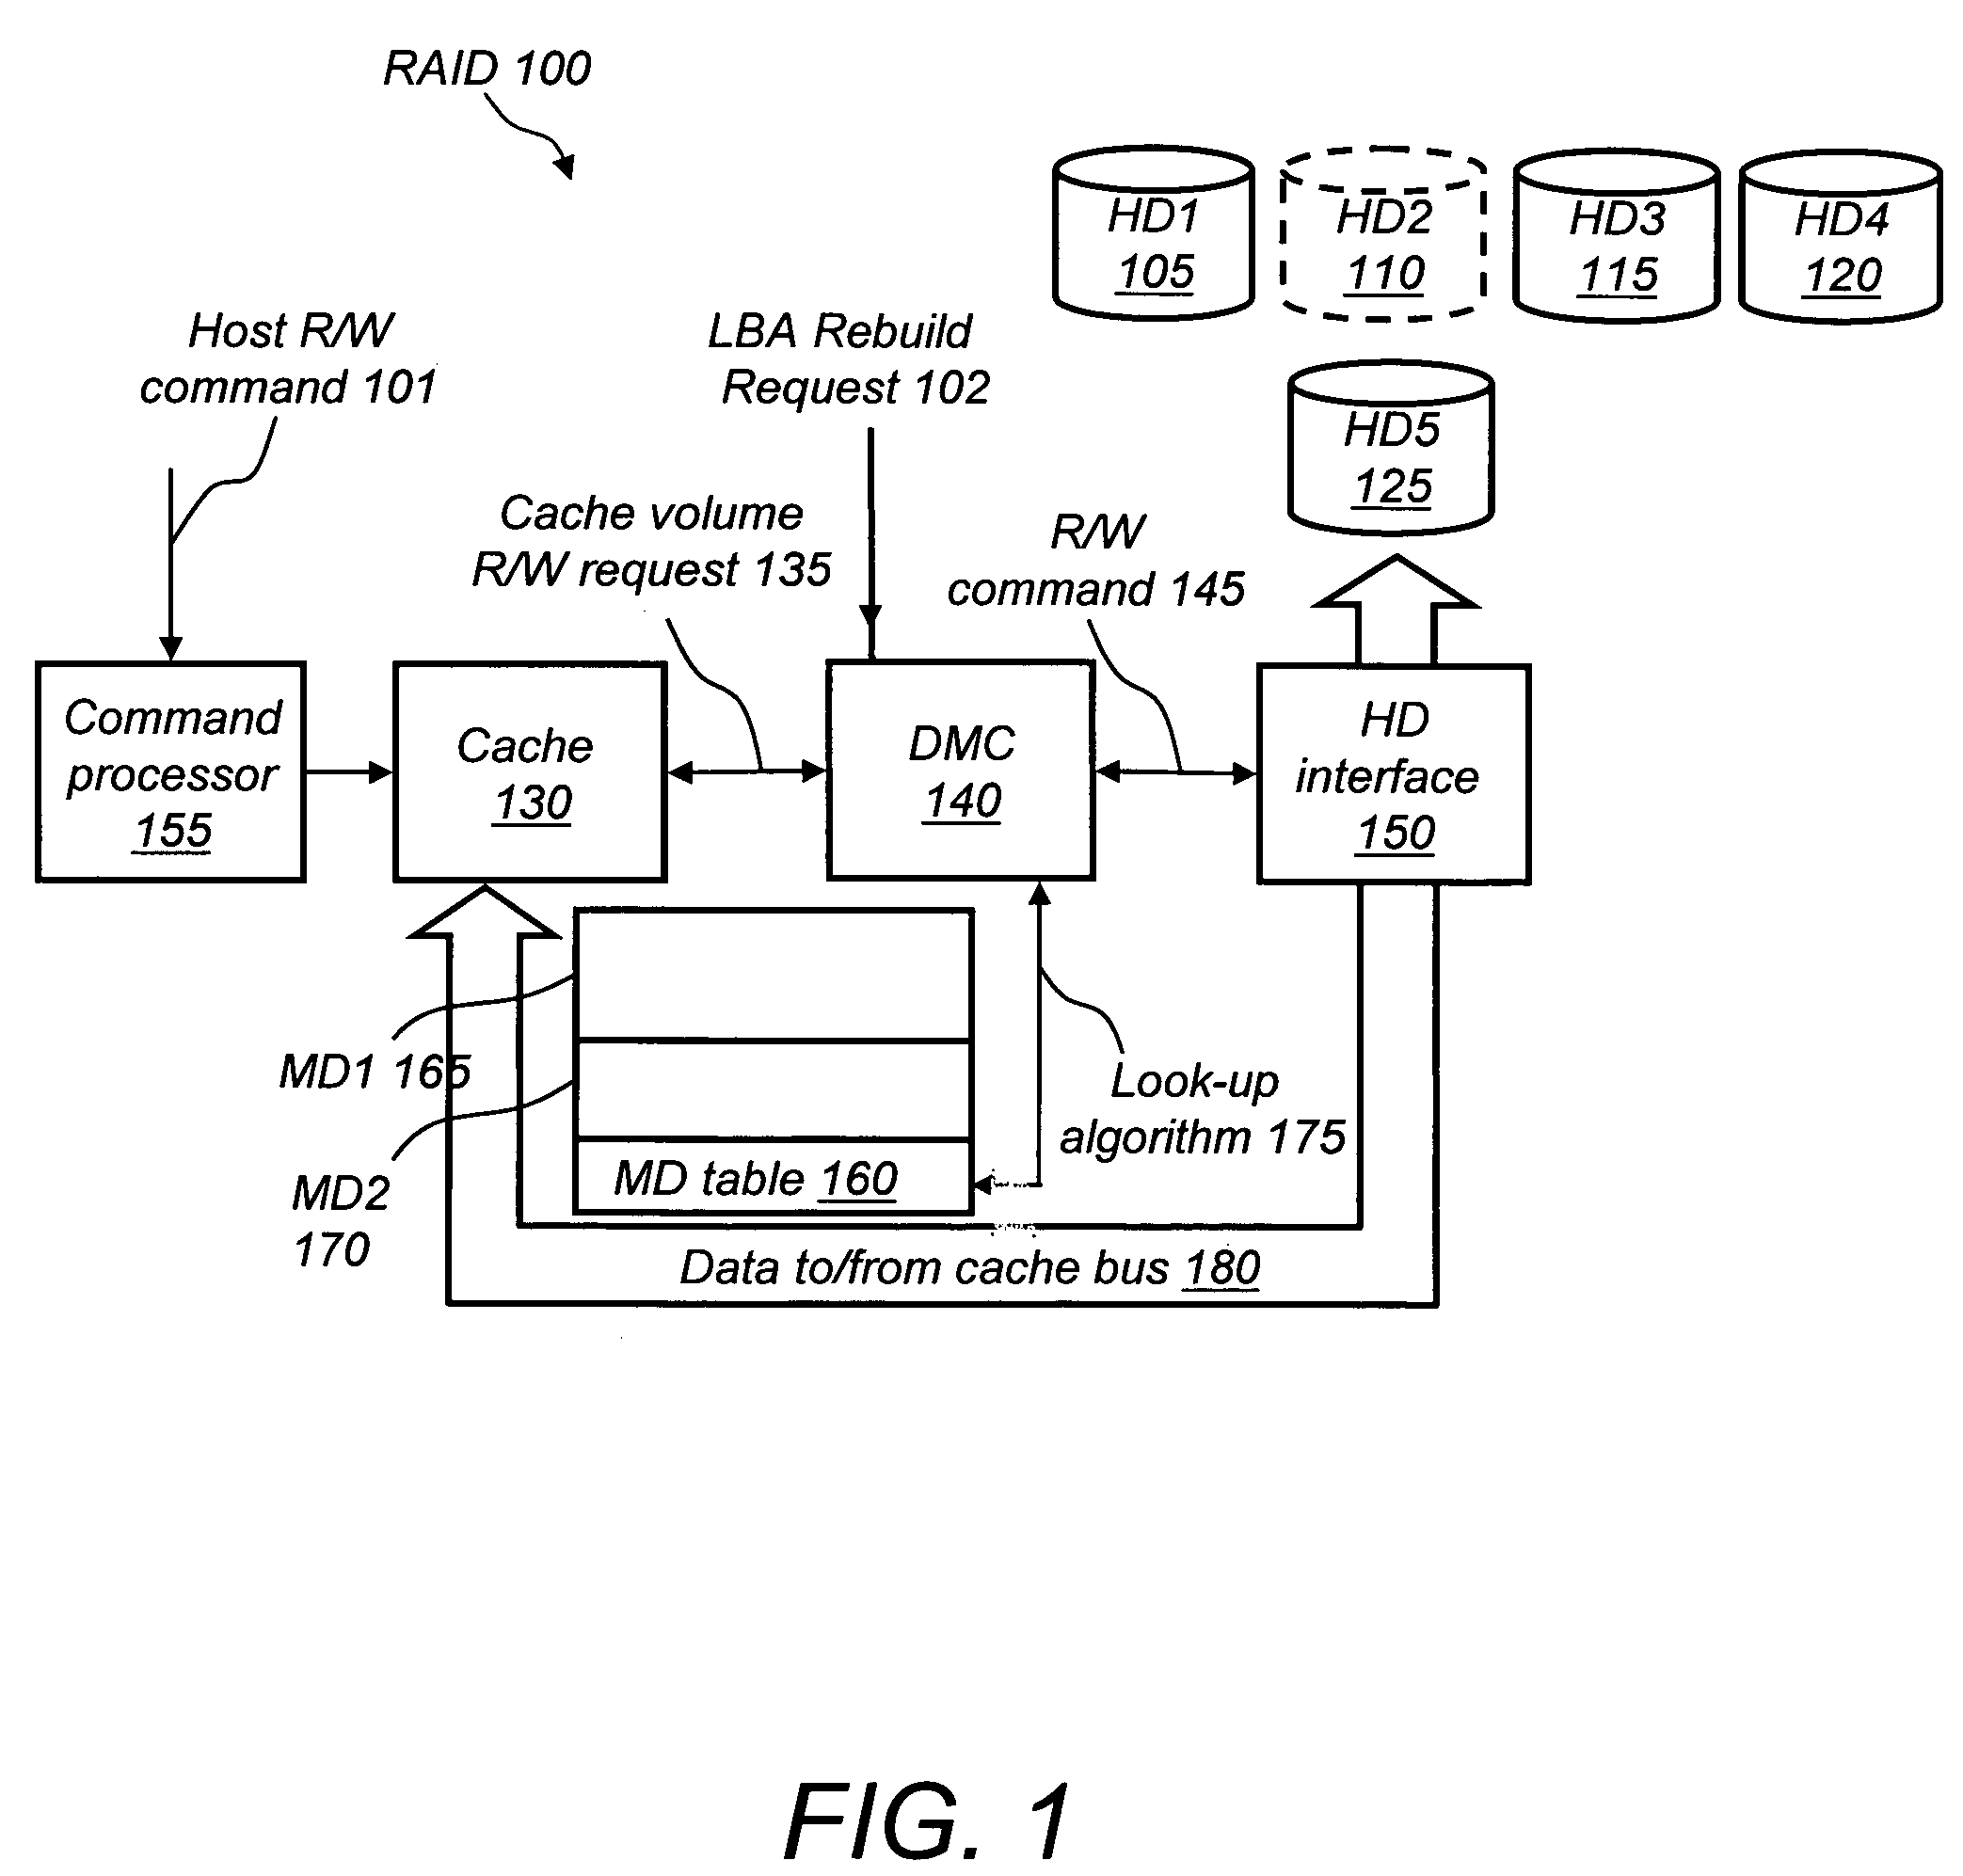 Method of controlling the system performance and reliability impact of hard disk drive rebuild